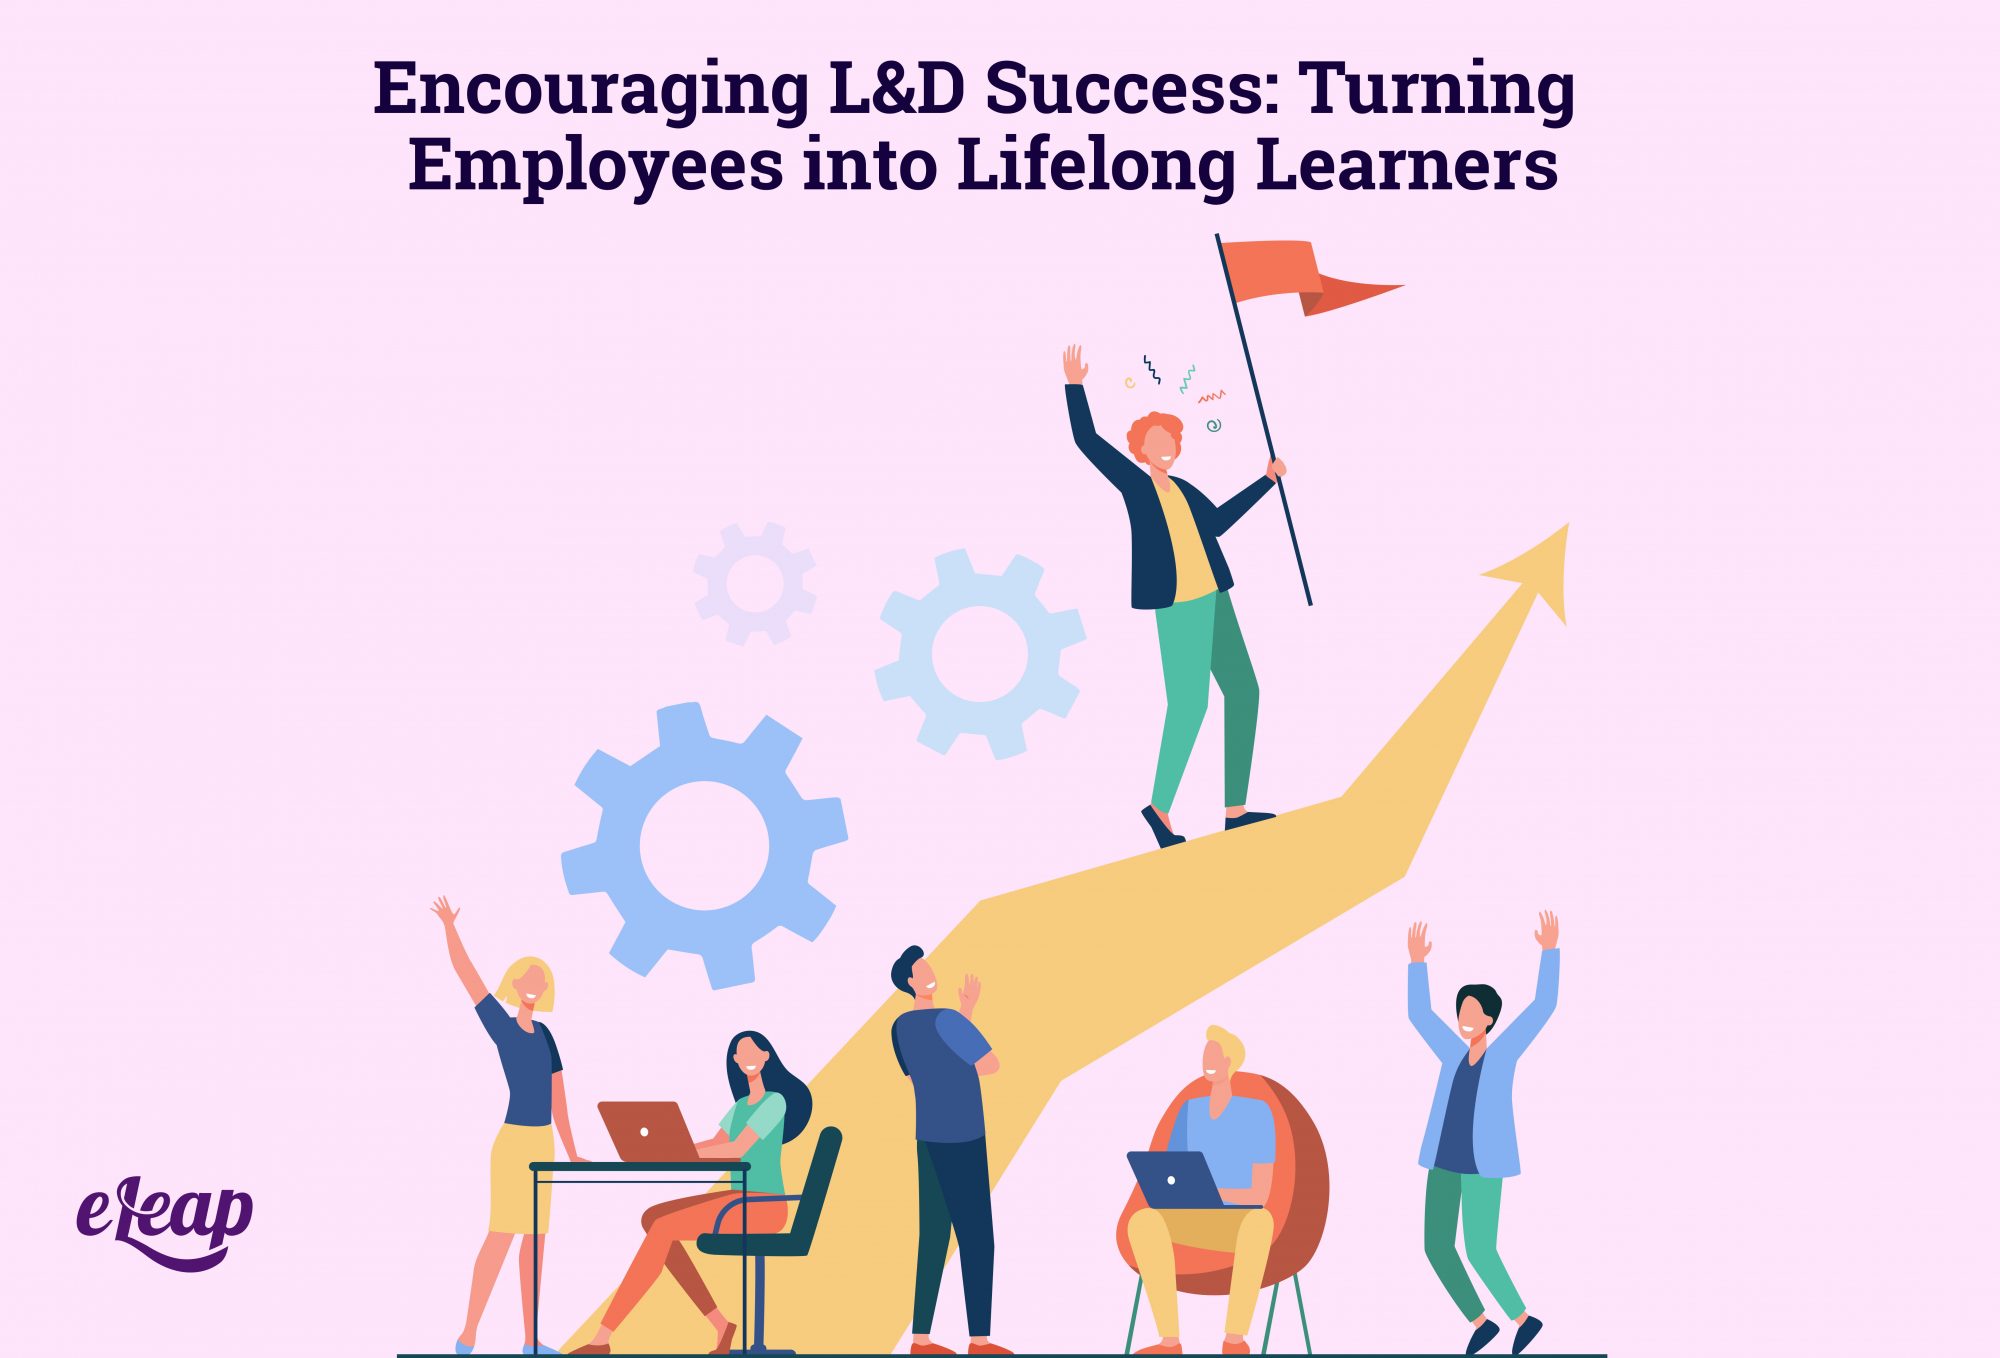 Encouraging L&D Success: Turning Employees into Lifelong Learners